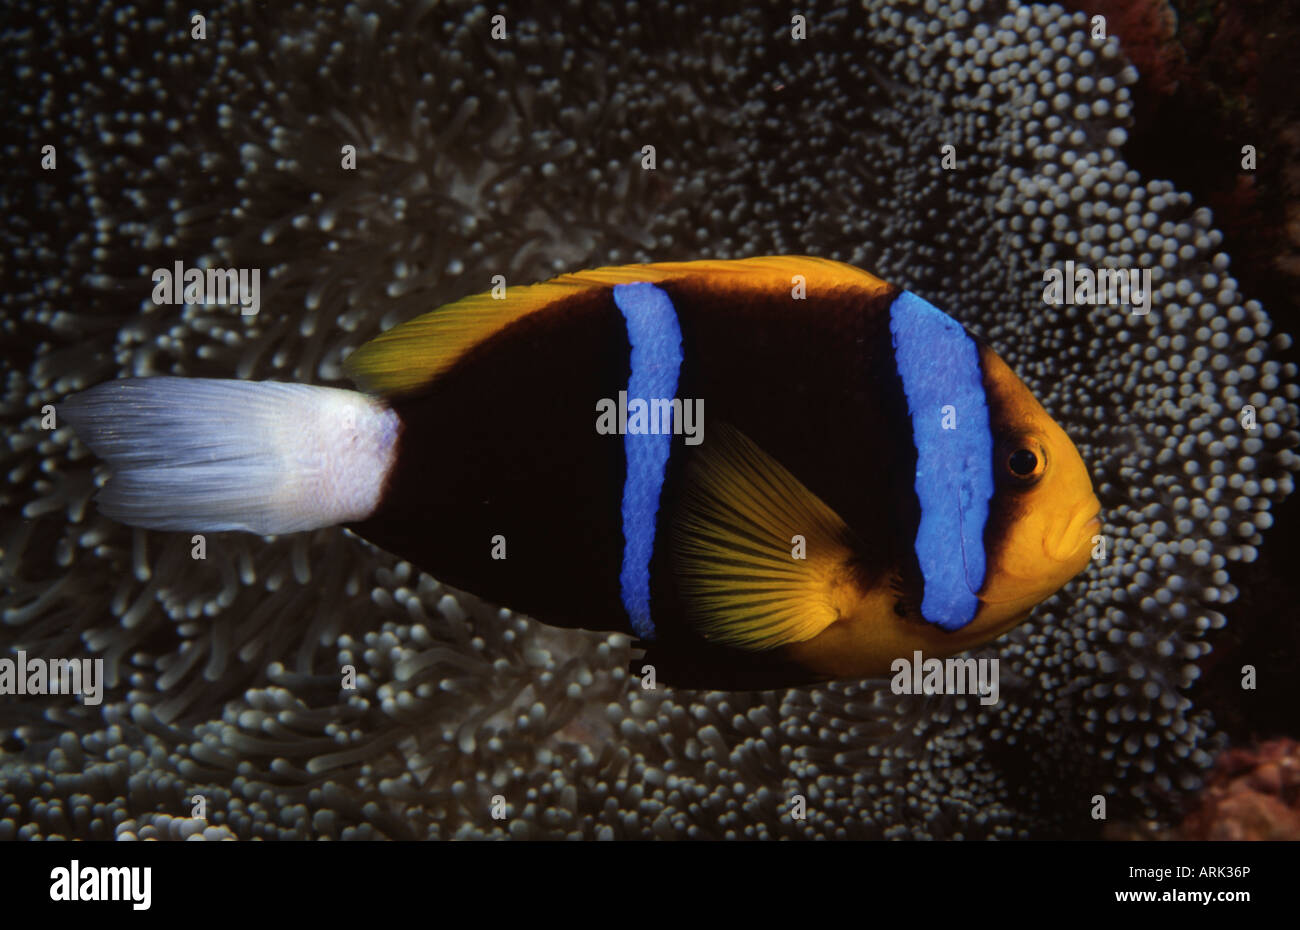 Close-up of an Orange-Fin clownfish (Amphiprion chrysopterus) underwater Stock Photo